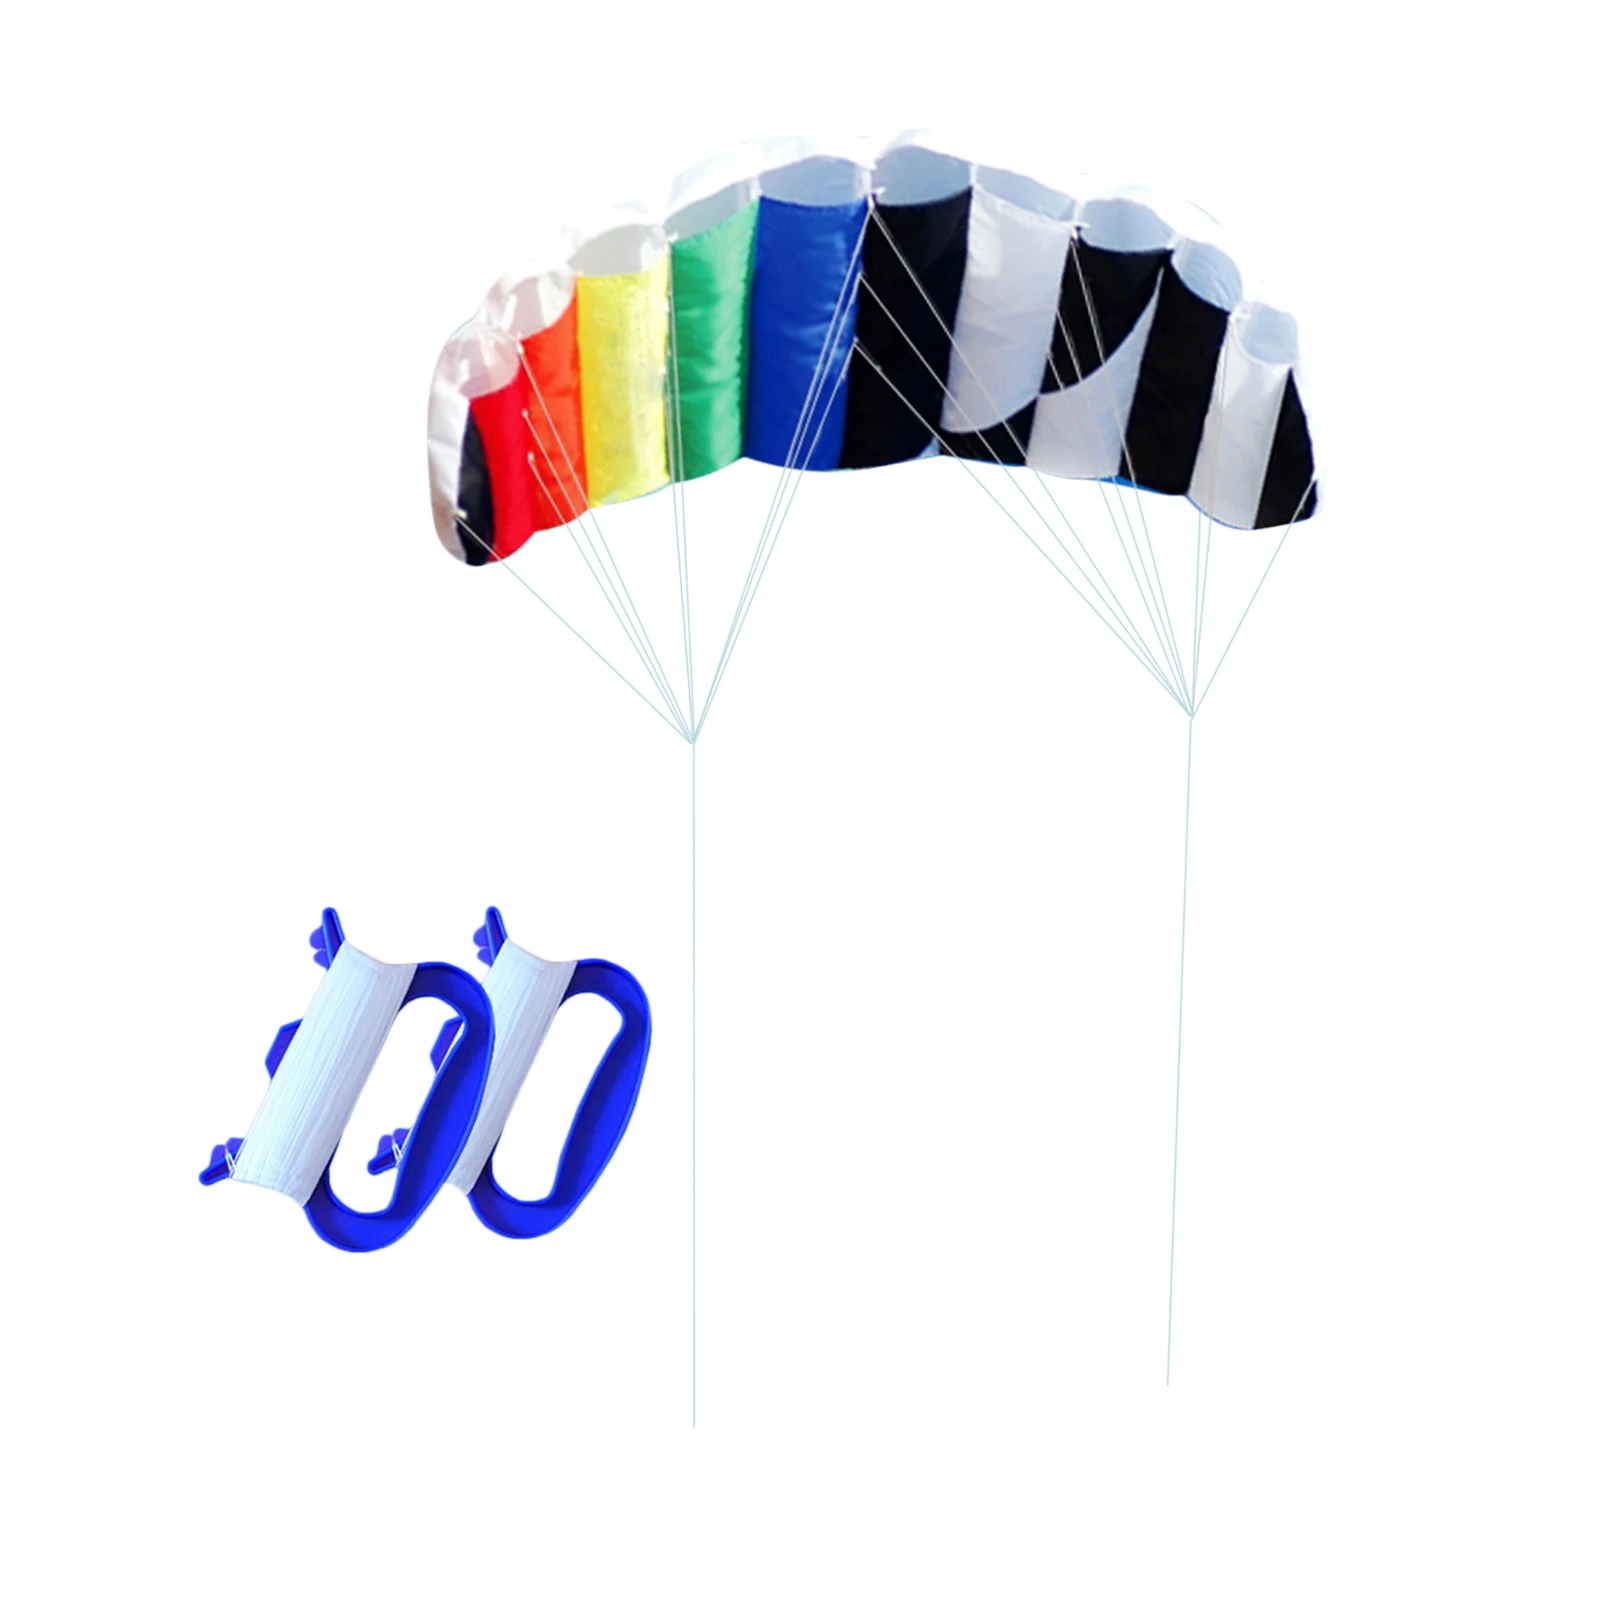 Dual Line Stunt Parafoil Kite Summer Beach Kite Surfing Surfboard Inflatable Kitesurfing Trainer Fly Kite Wing for Water Sport